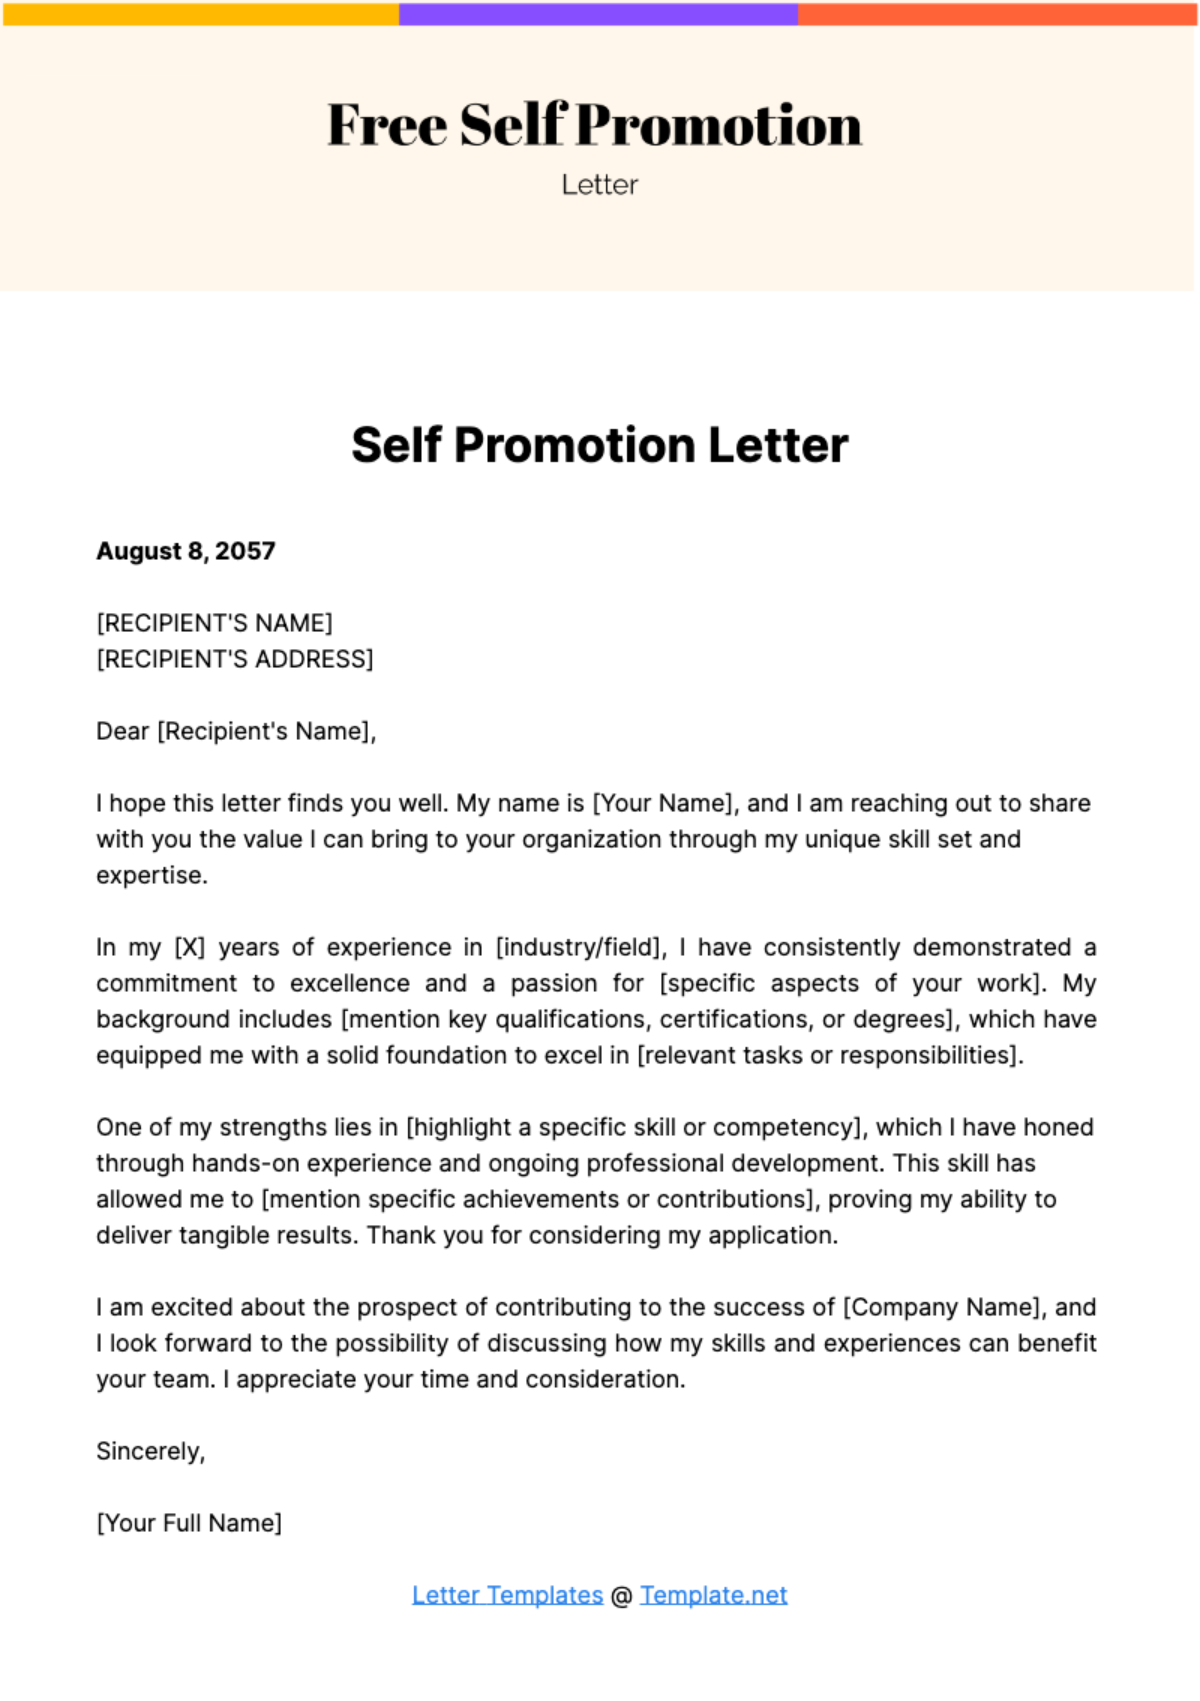 Self Promotion Letter Template